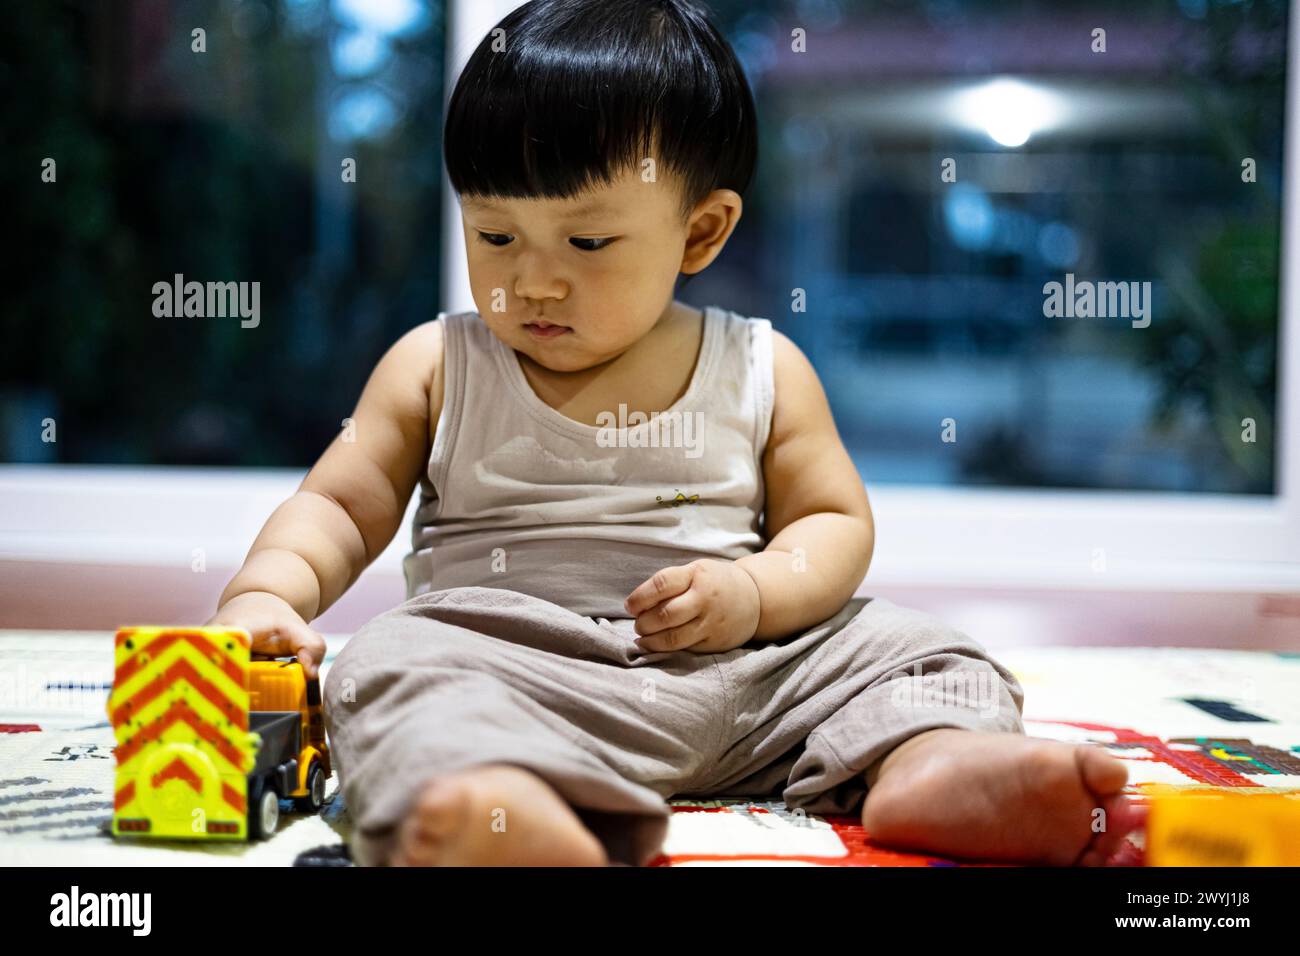 Close up of little boy in casual clothes sitting on floor and playing toy trucks while spending free time at home. Stock Photo